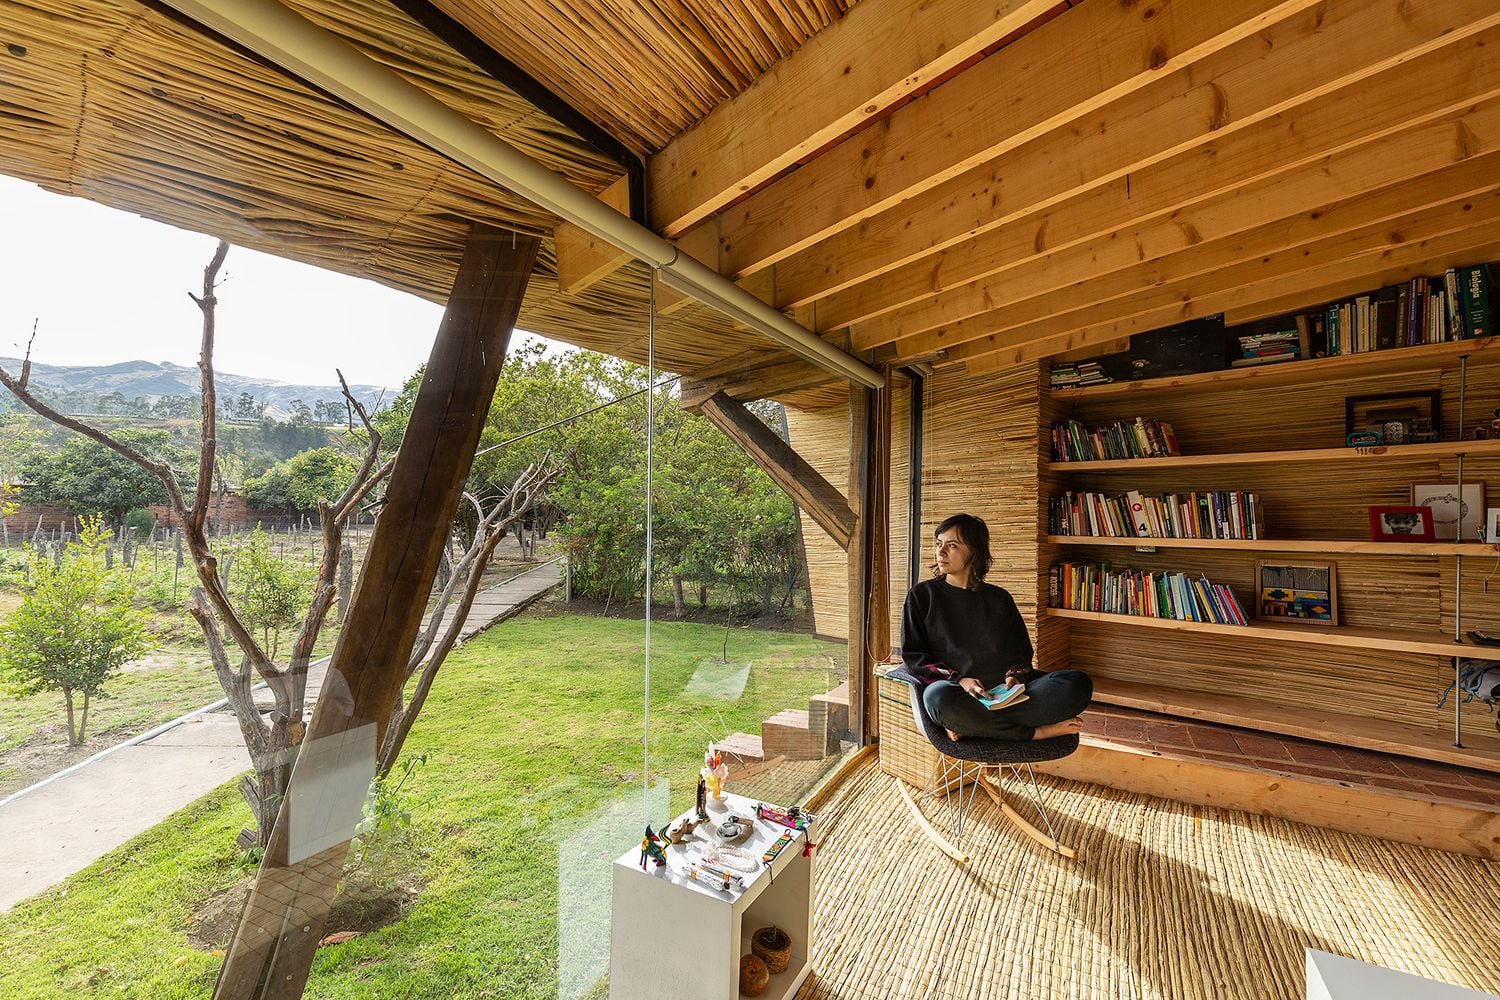 The House of Flying Tiles' reading nook has no shortage of natural light.